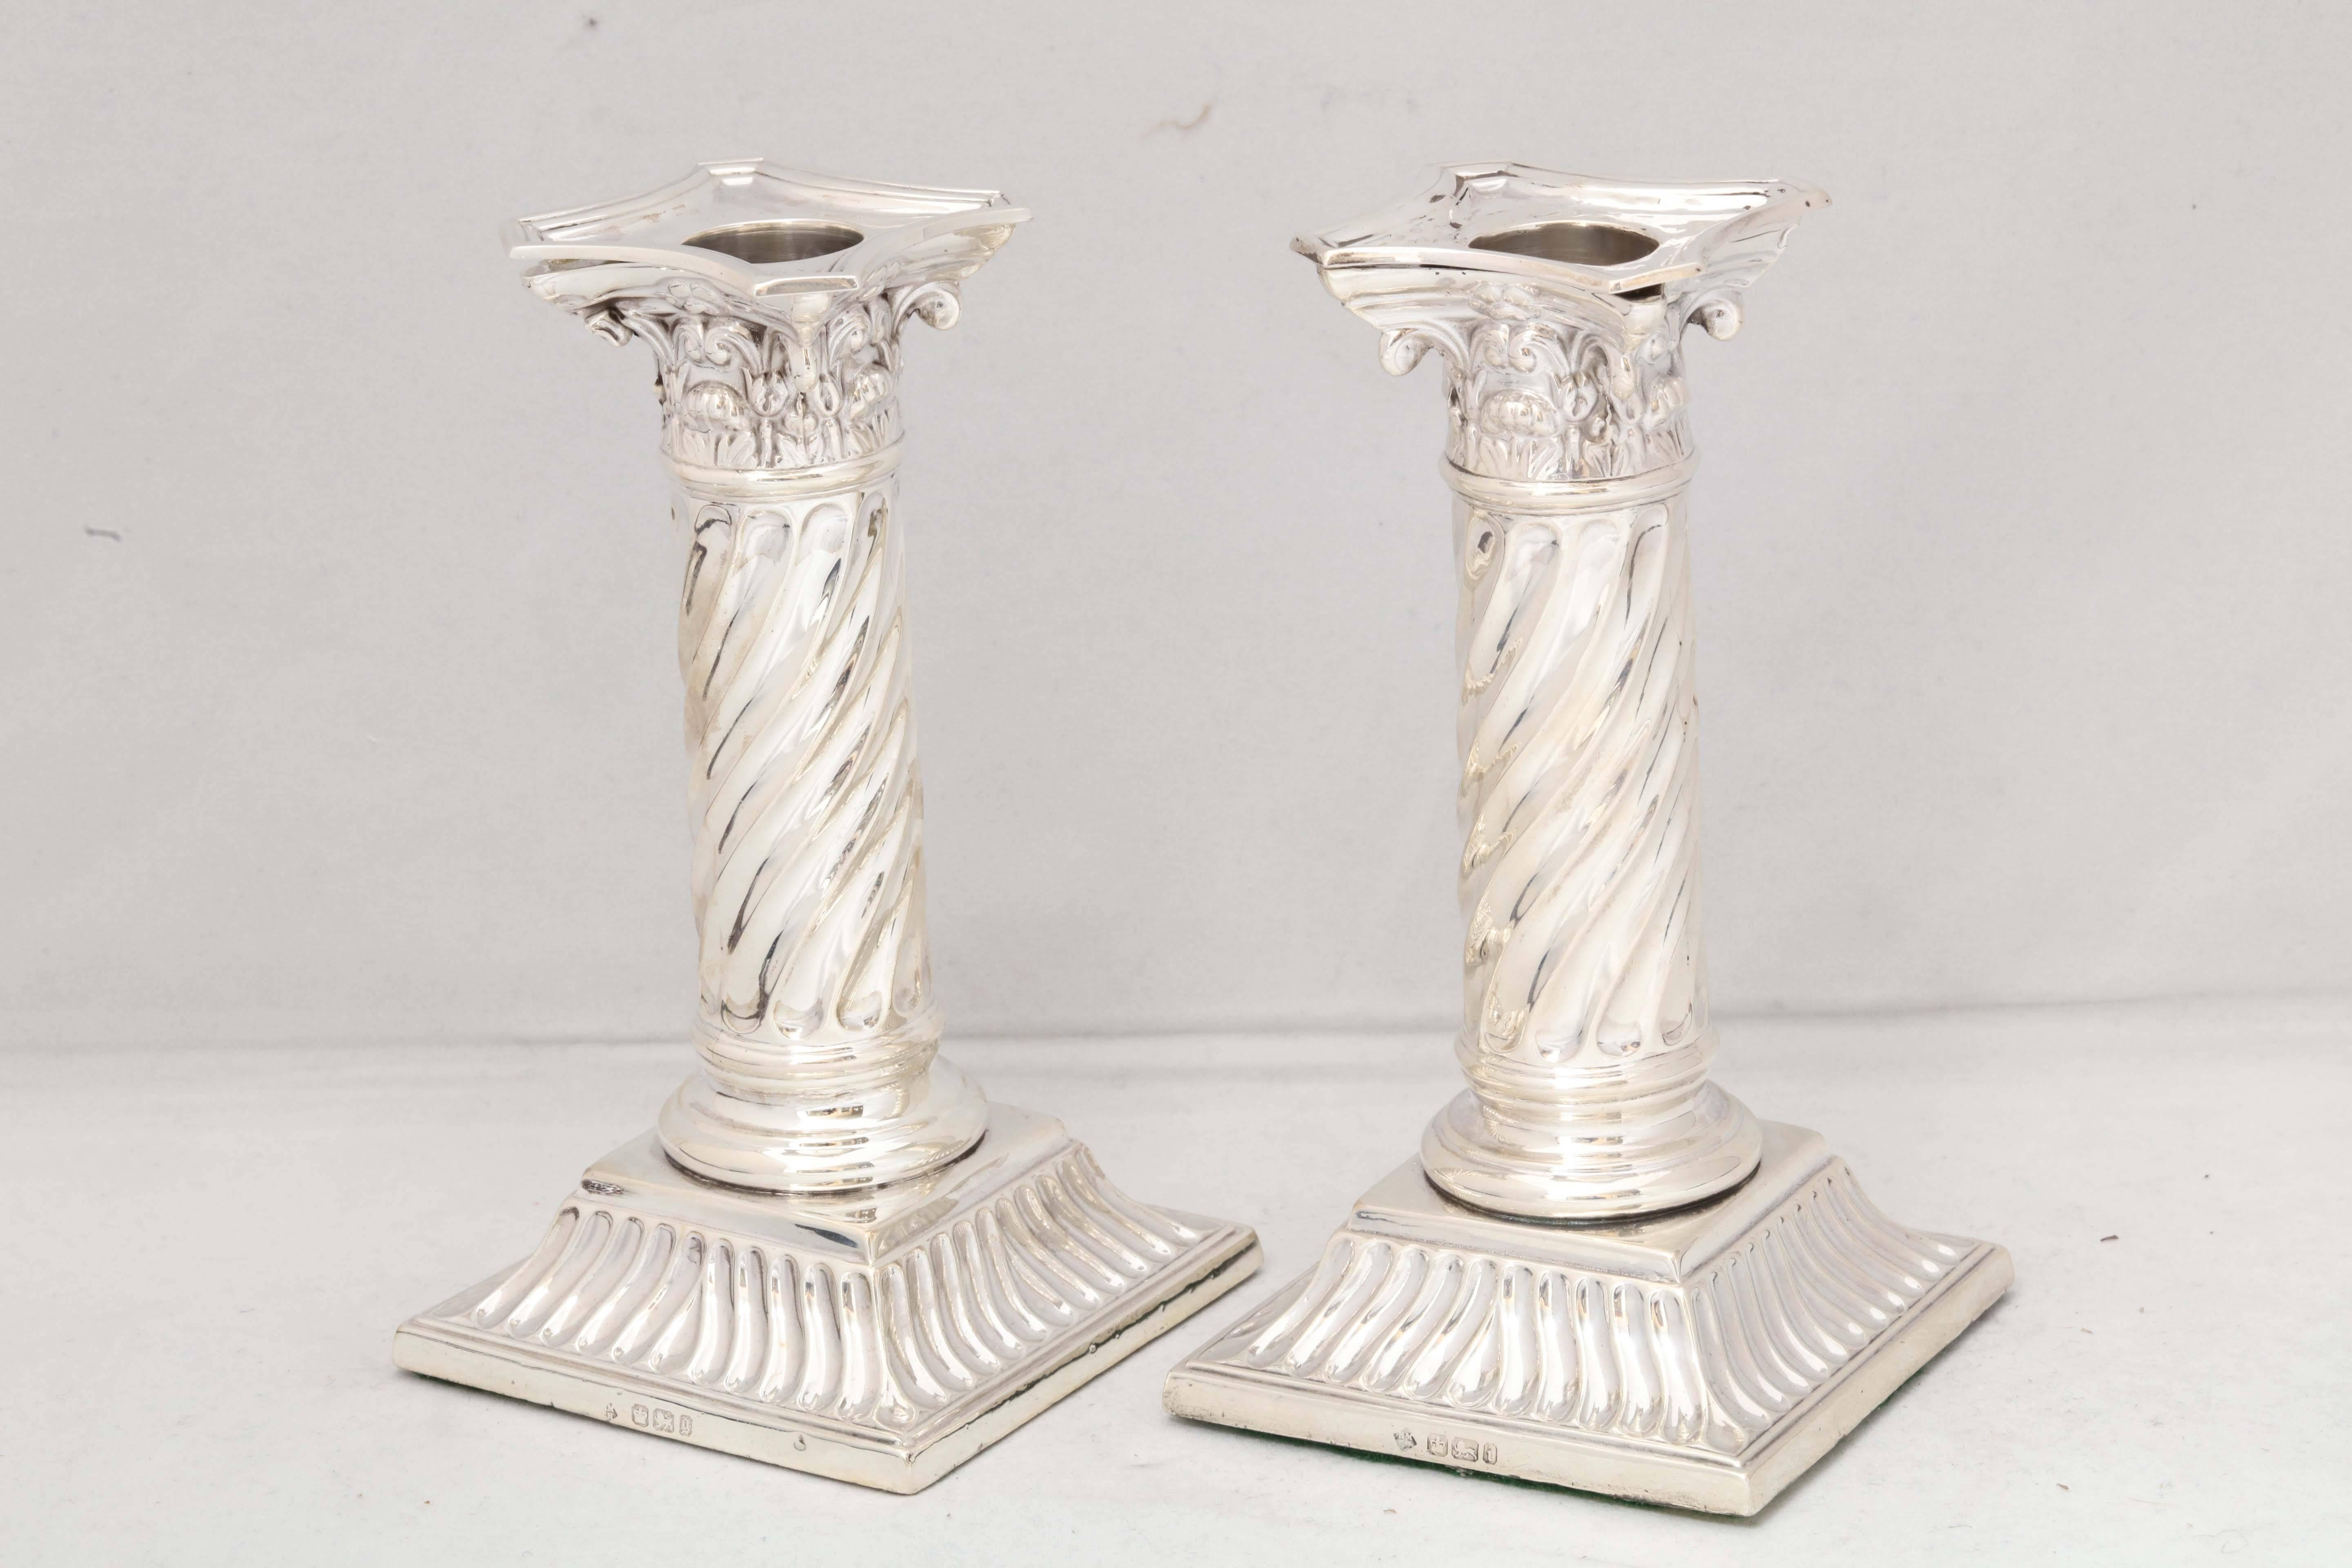 Unusual Pair of Victorian Neoclassical Sterling Silver Column-Form Candlesticks 3